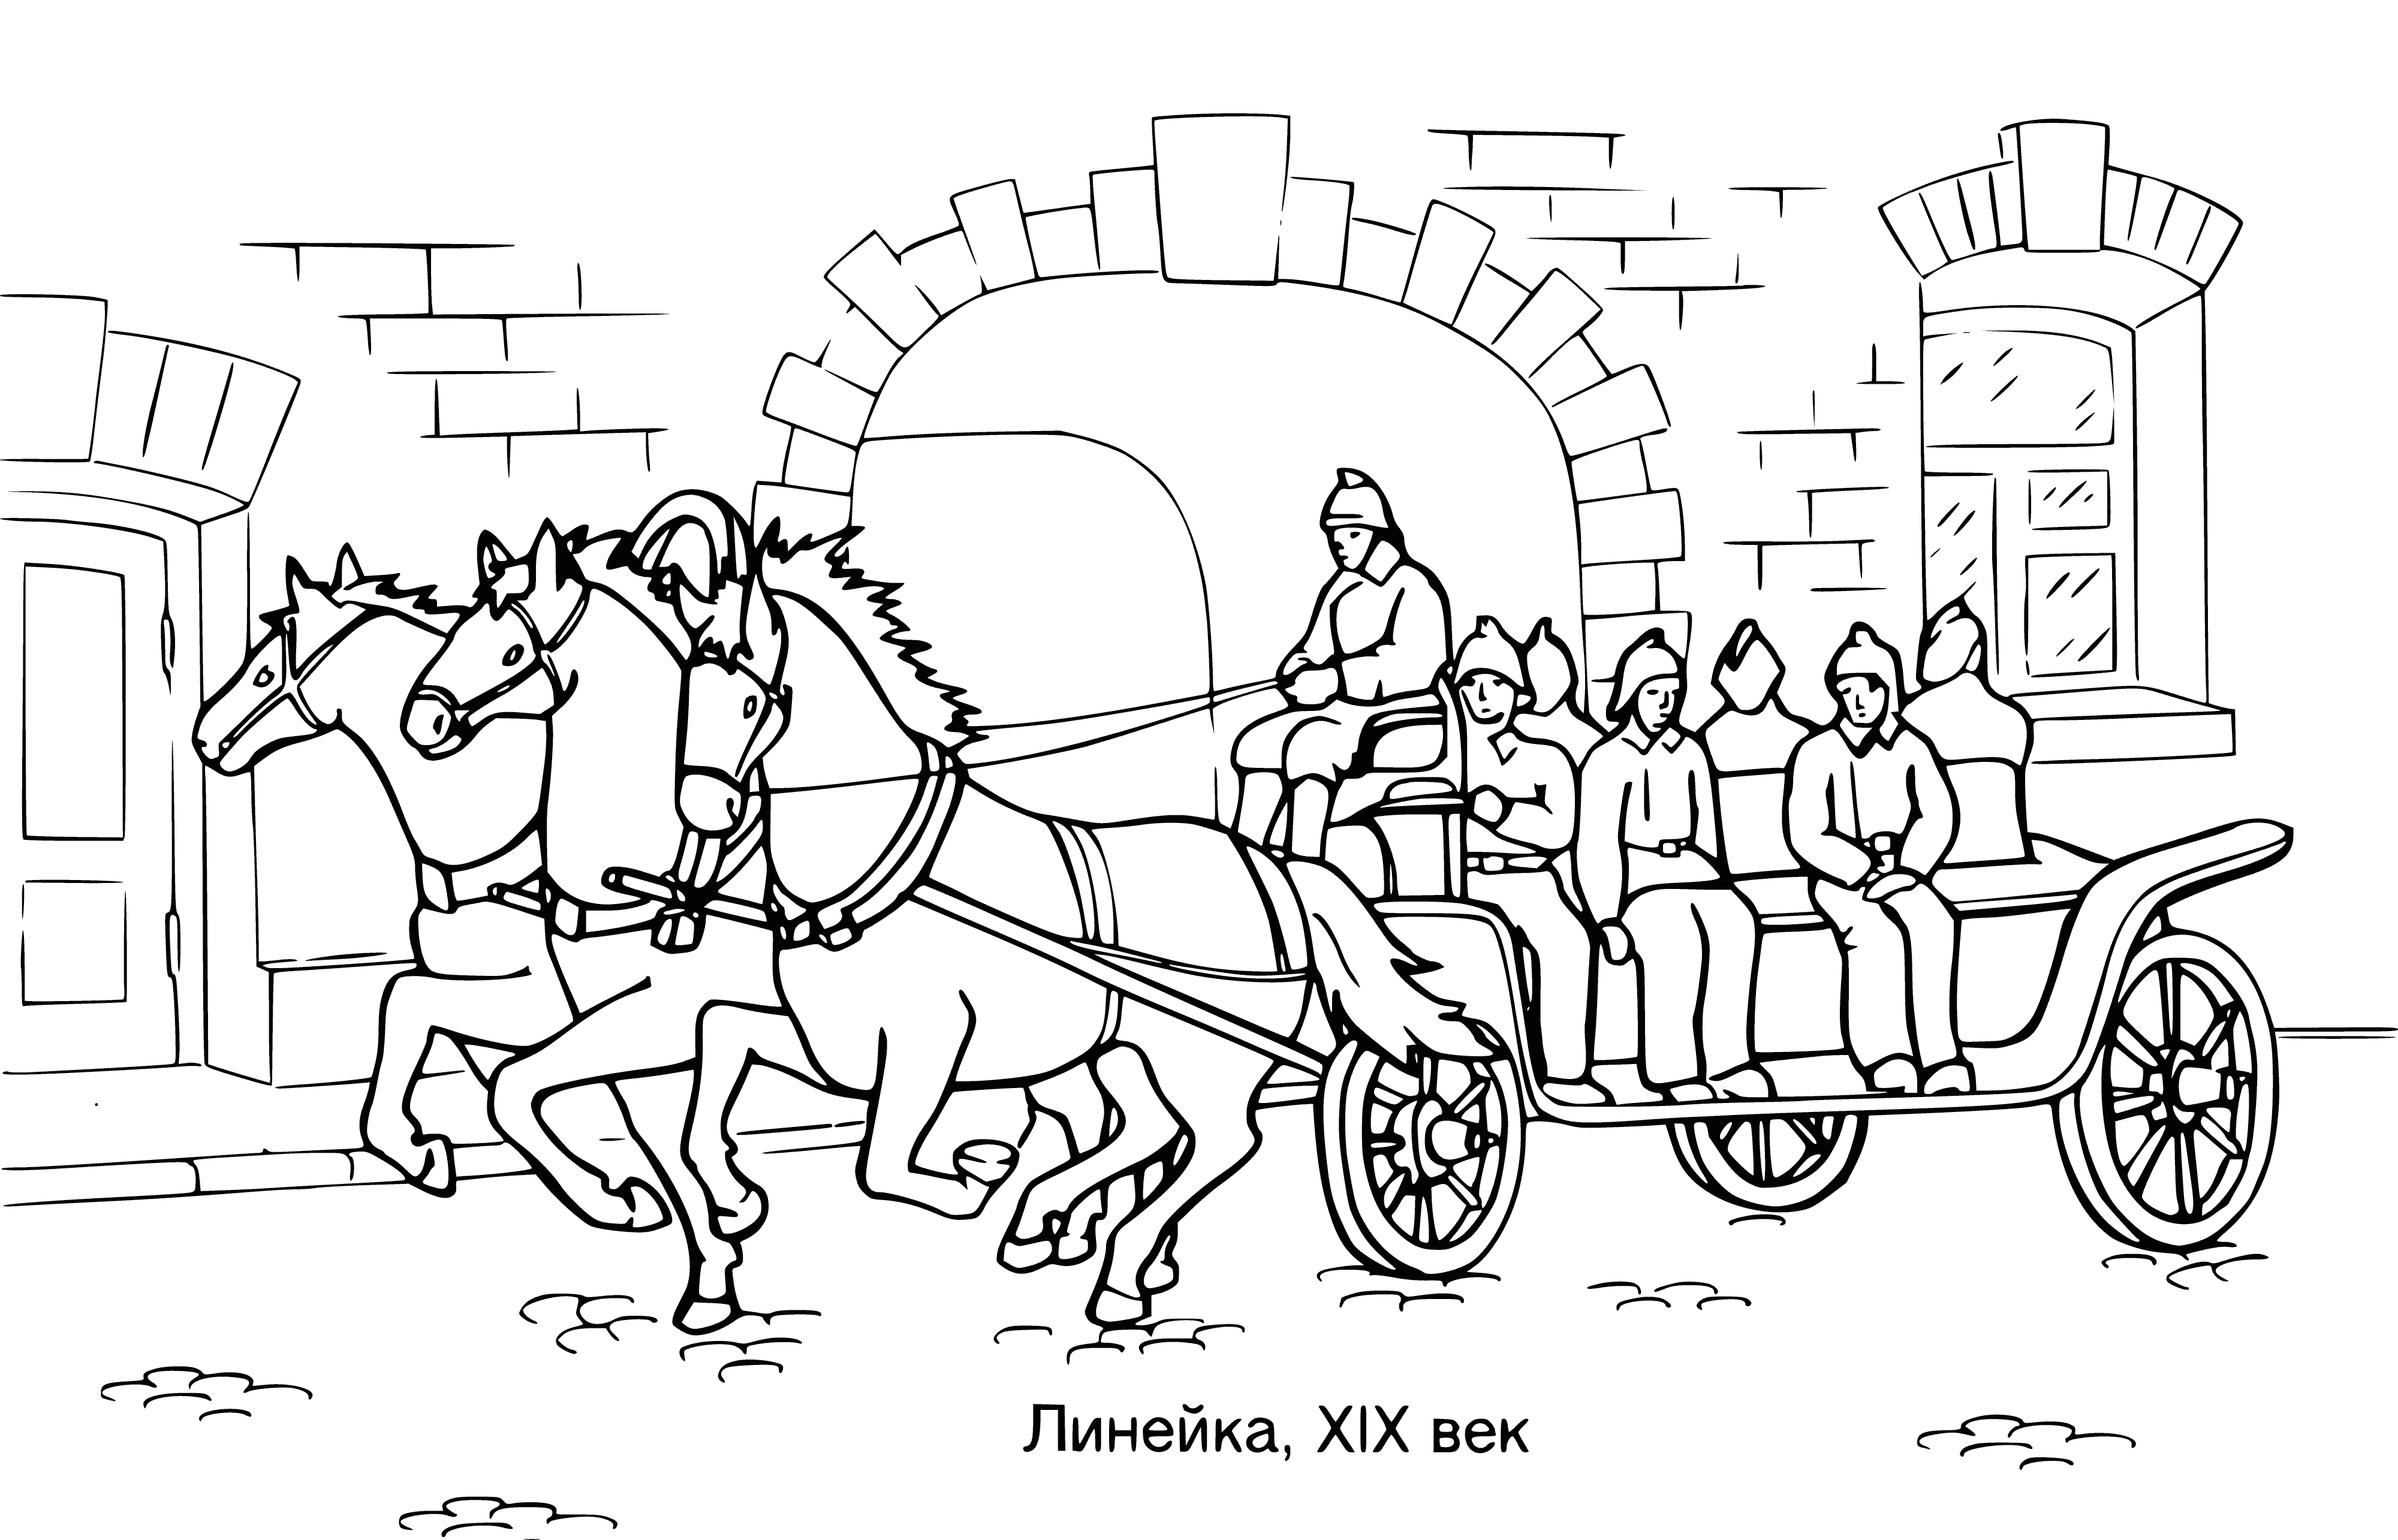 coloring page: A carriage pulled by two horses is decorated in red, gold & ready for an event. It's full of firefighters & police officers, showing comradeship & camaraderie.